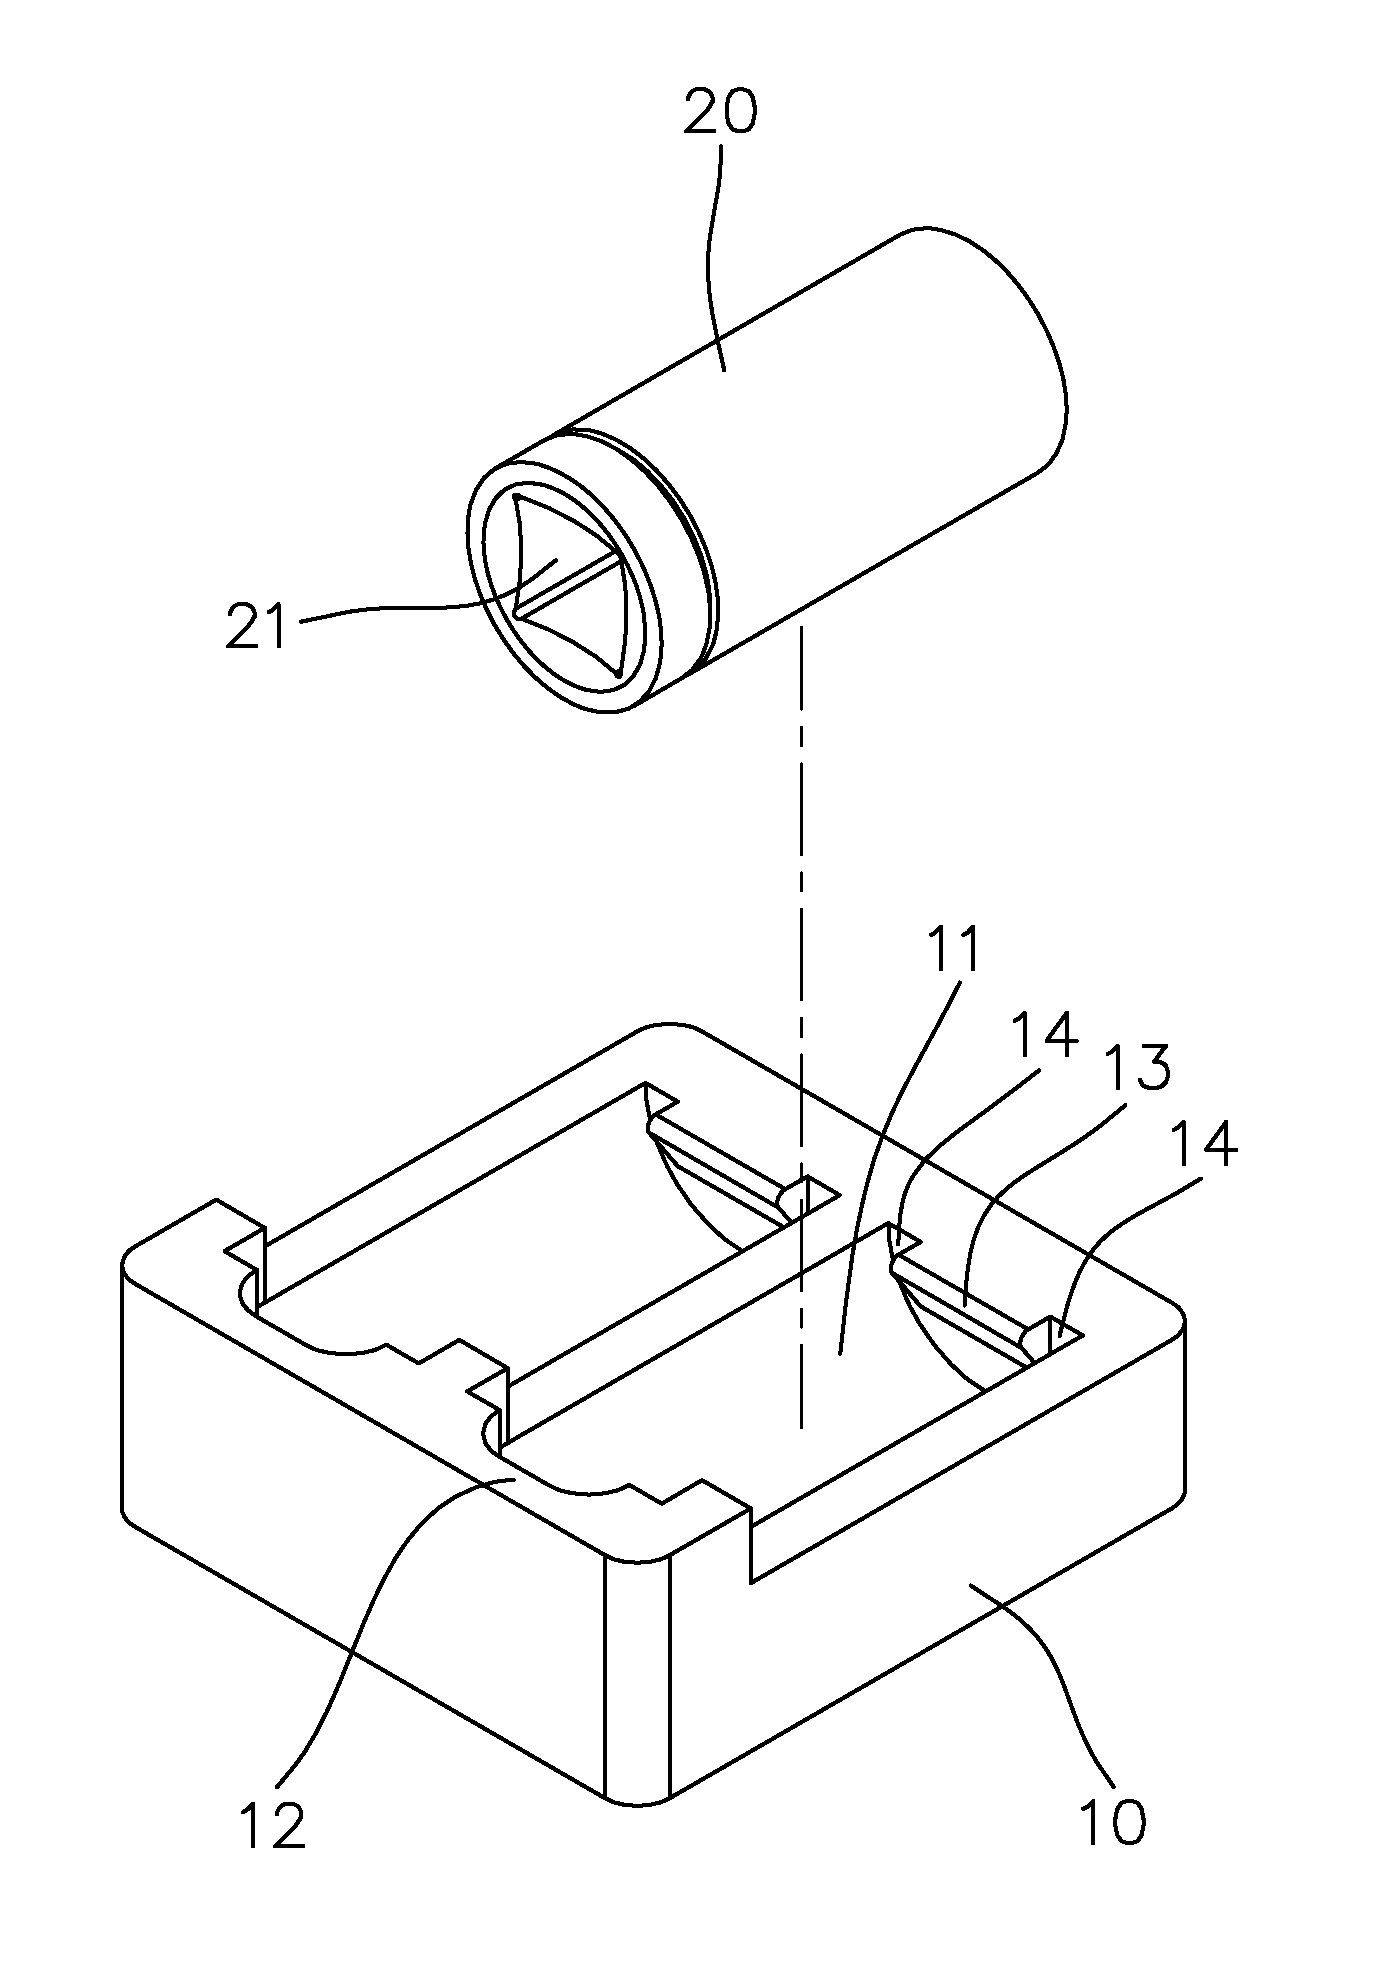 Holding unit for sockets